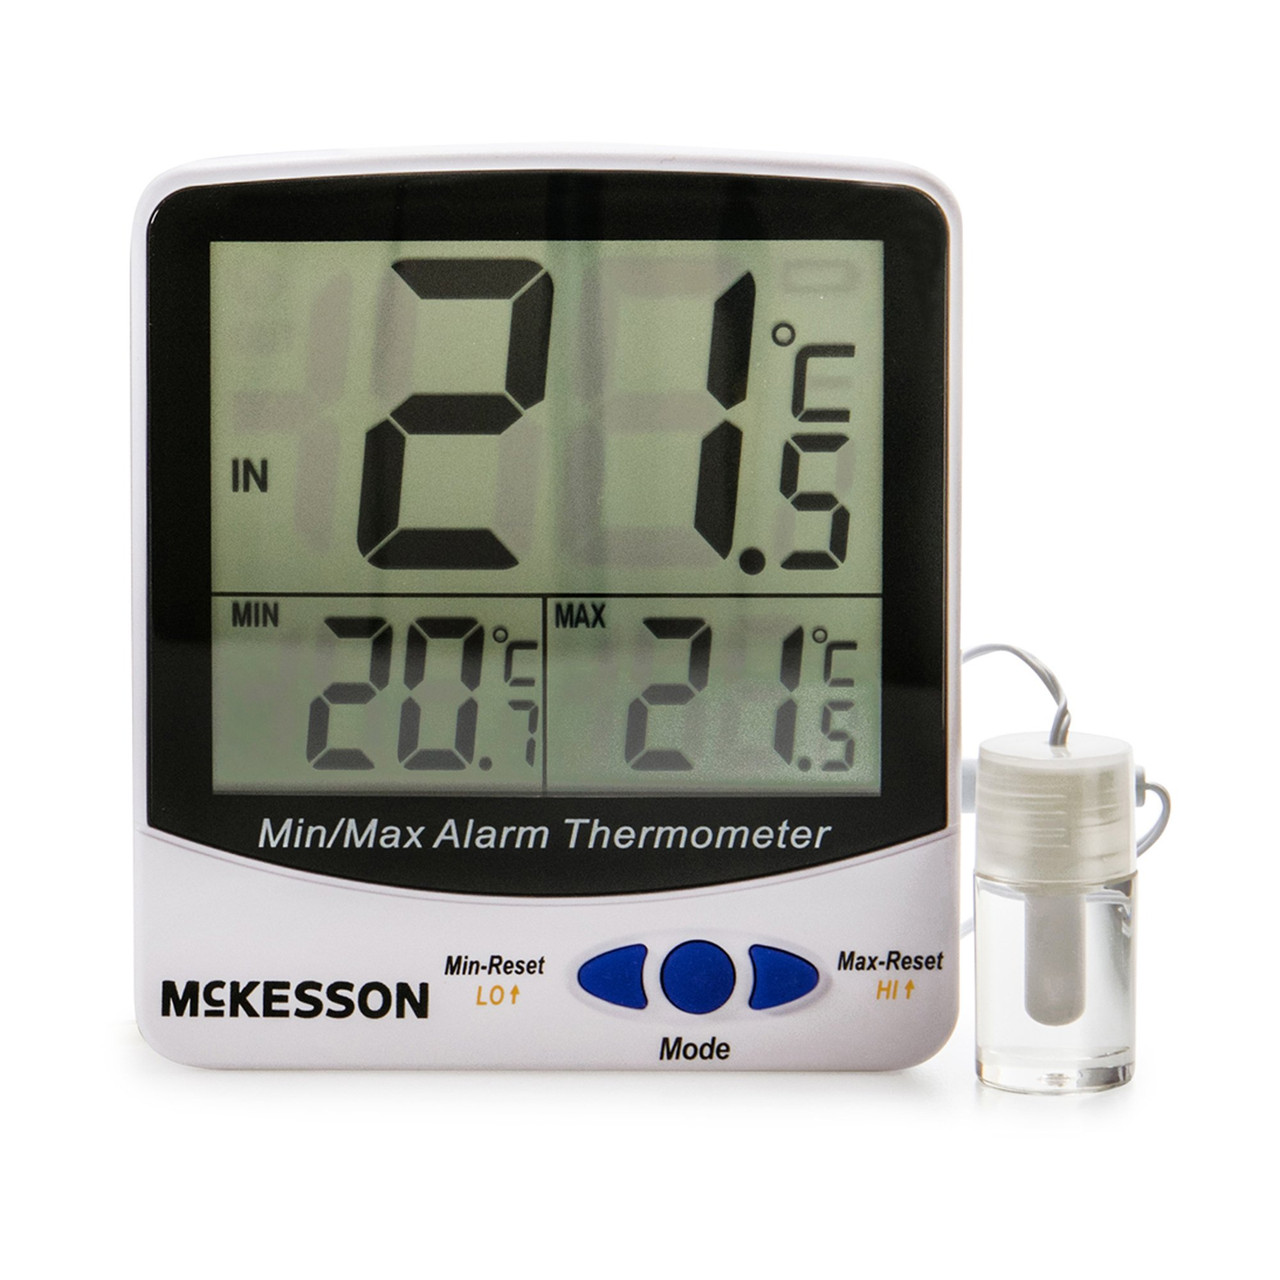 McKesson Large Digit Single Probe Freezer Thermometer - Simply Medical